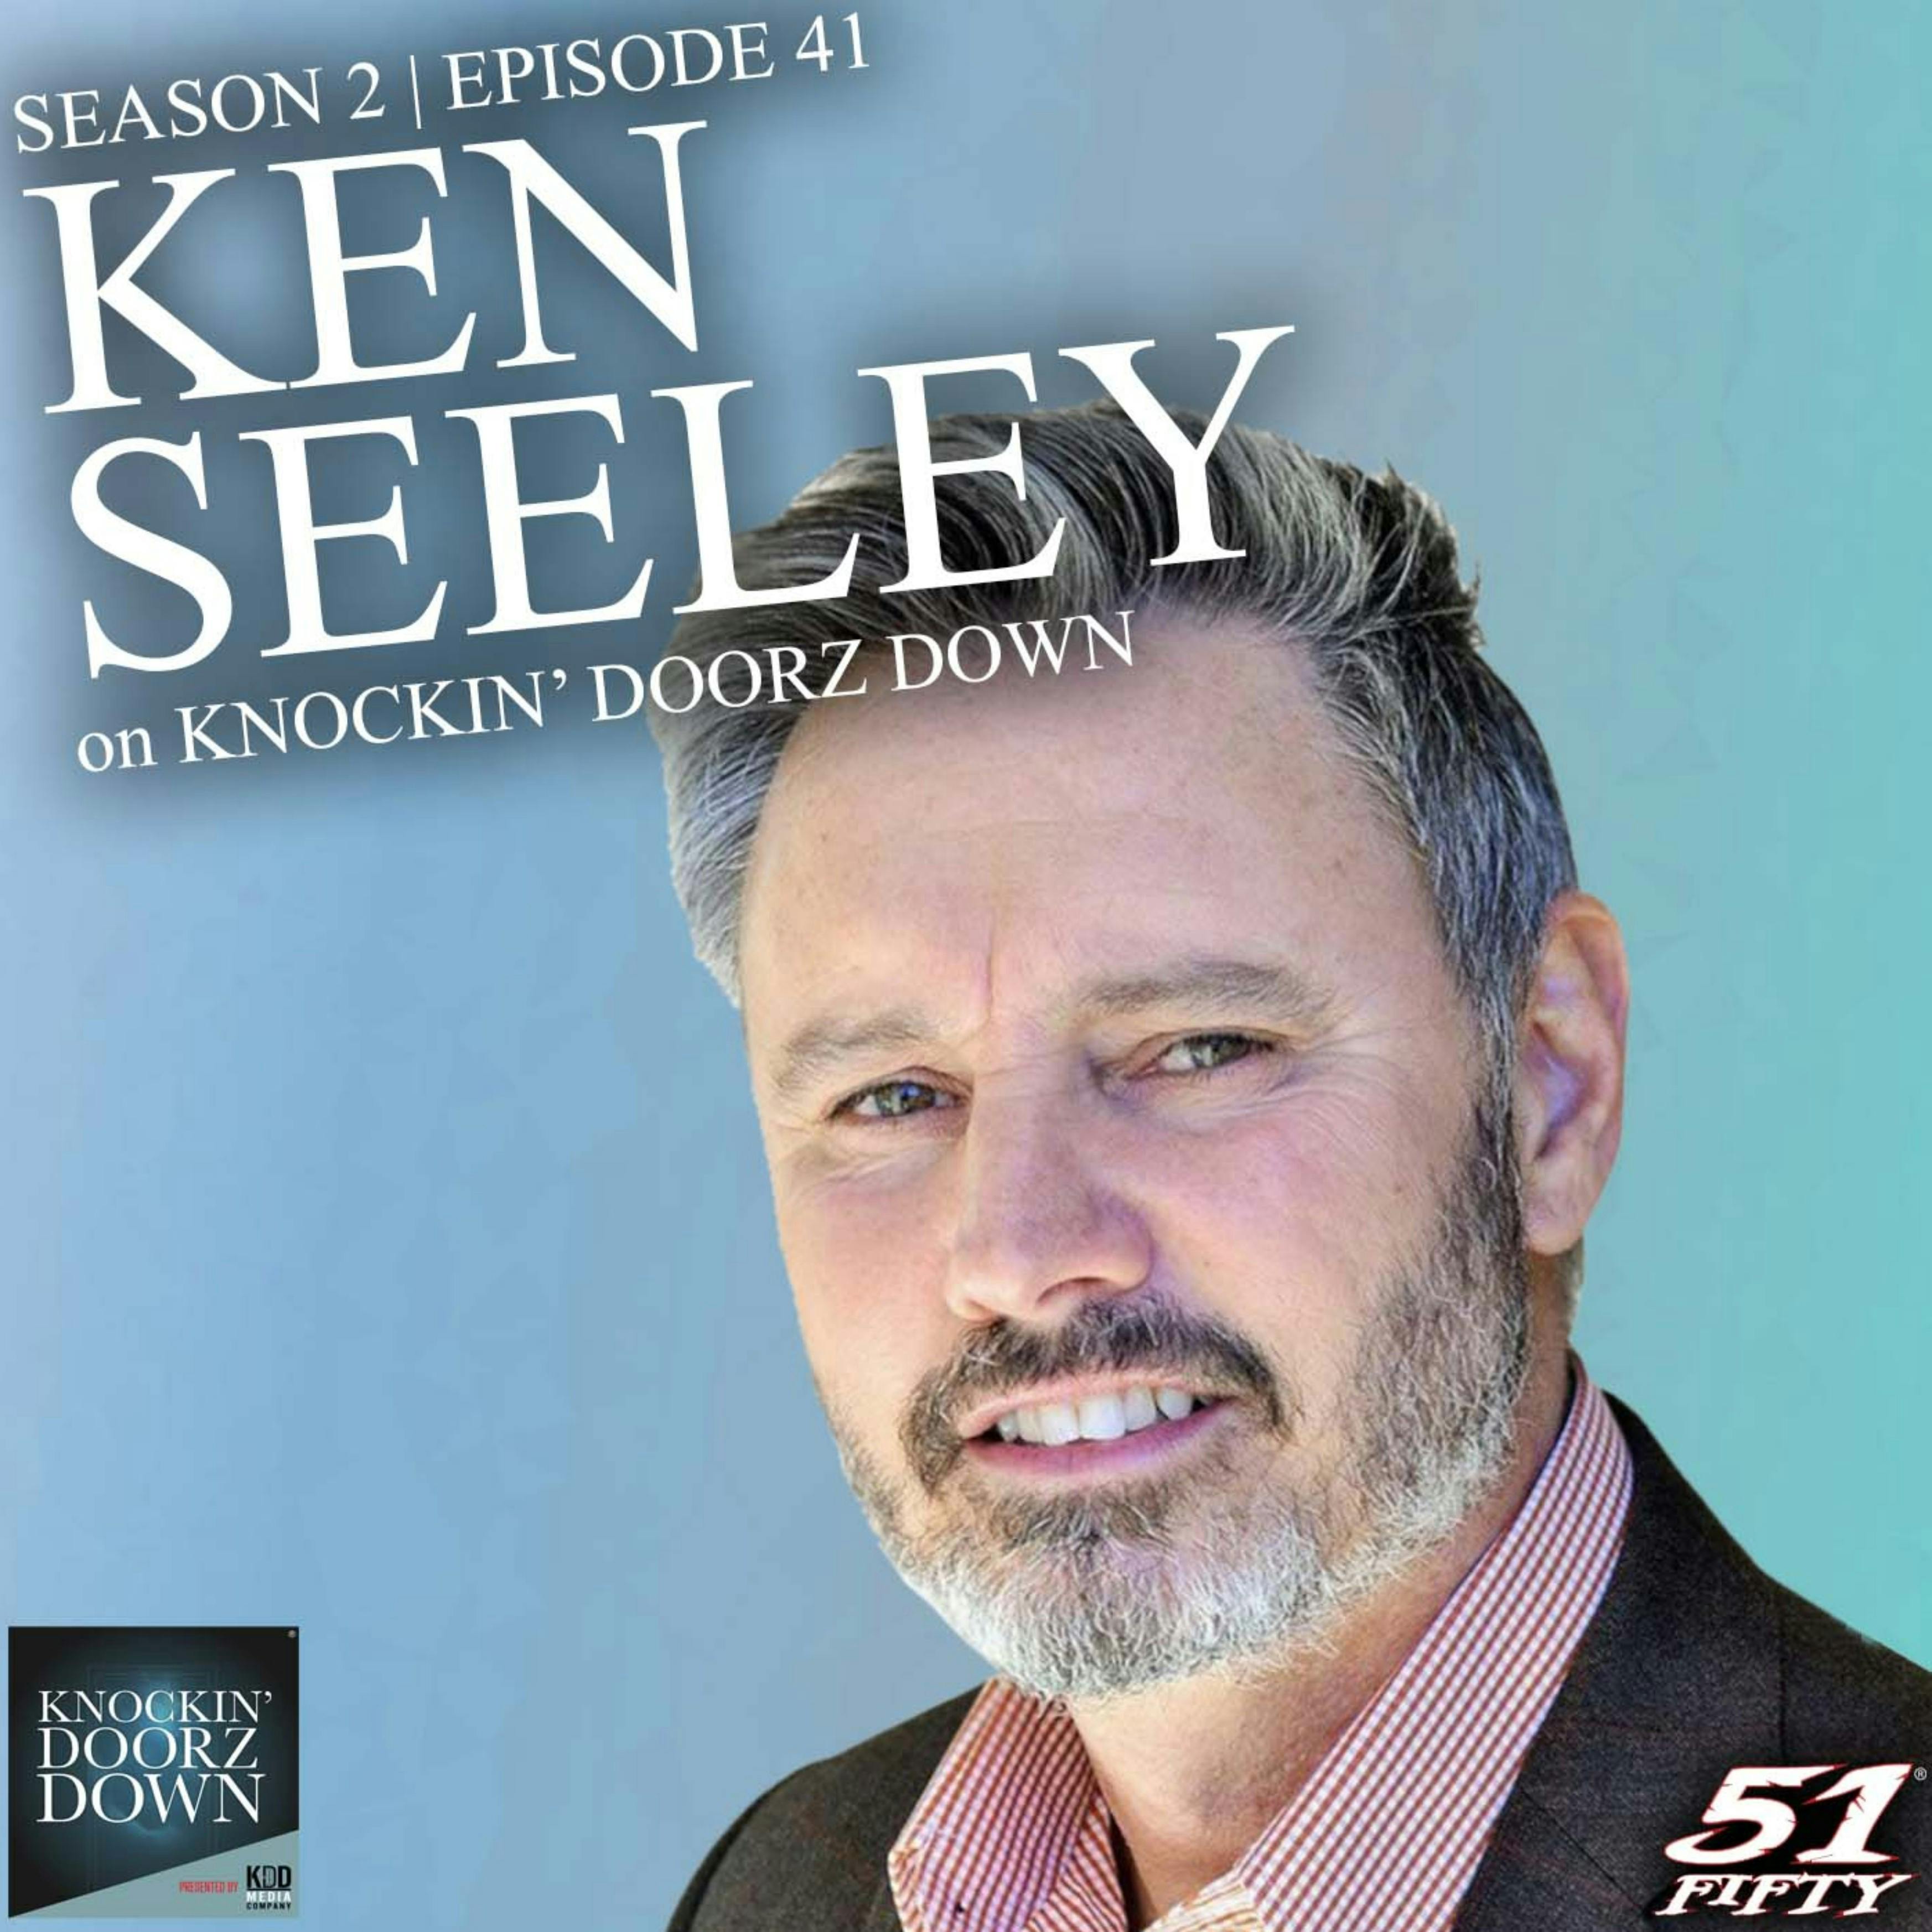 Ken Seeley | A&E Intervention, Crystal Meth, Sex Addiction, Recovery, Author & Advocate for Recovery